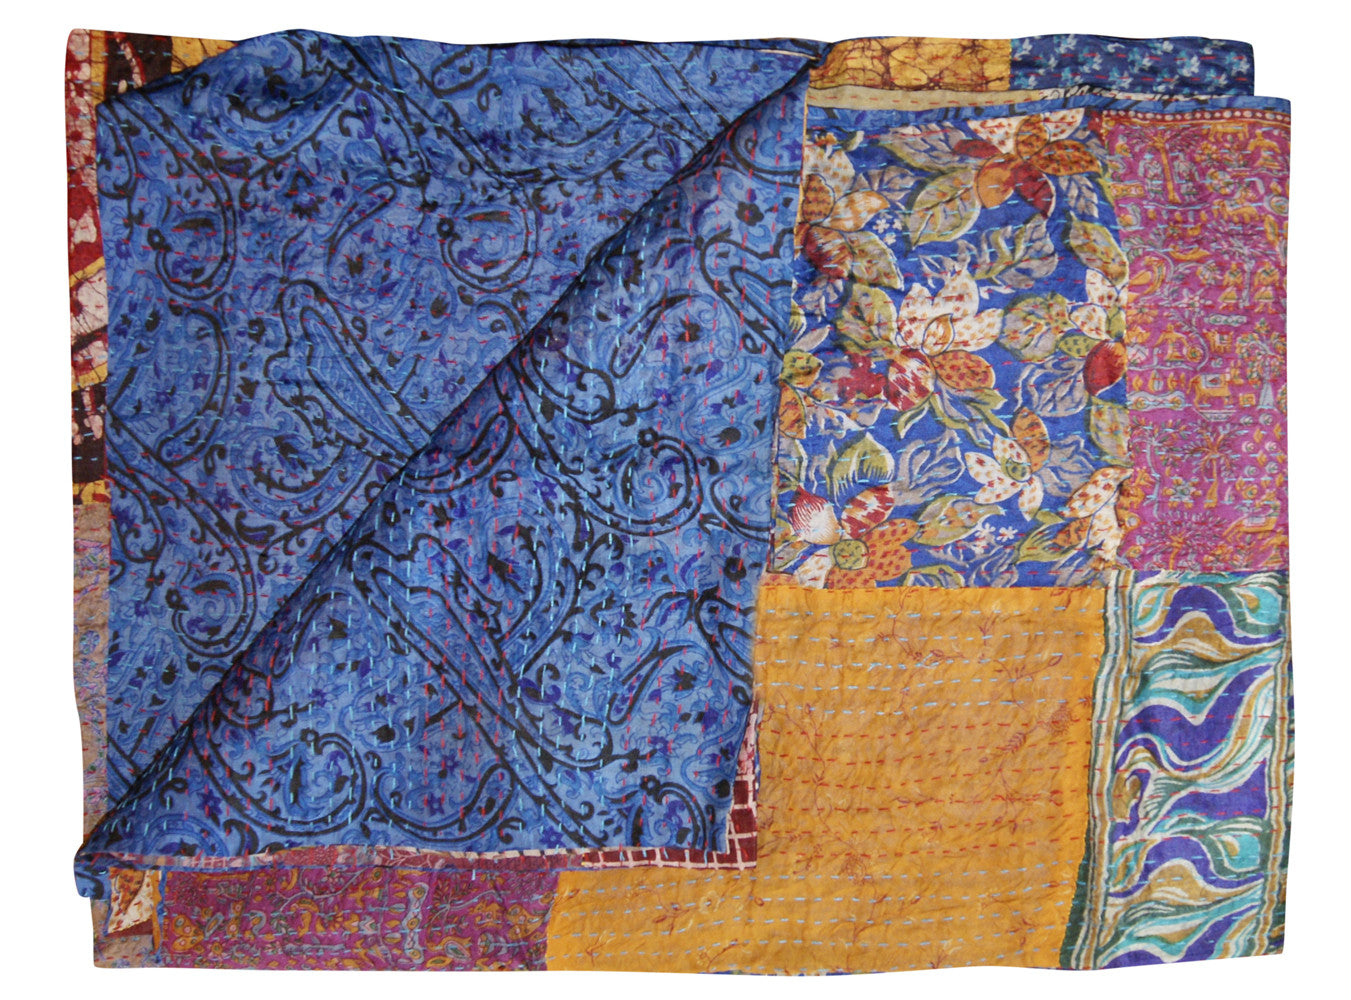 60" X 90" Blue and Yellow Kantha Cotton Patchwork Throw Blanket with Embroidery